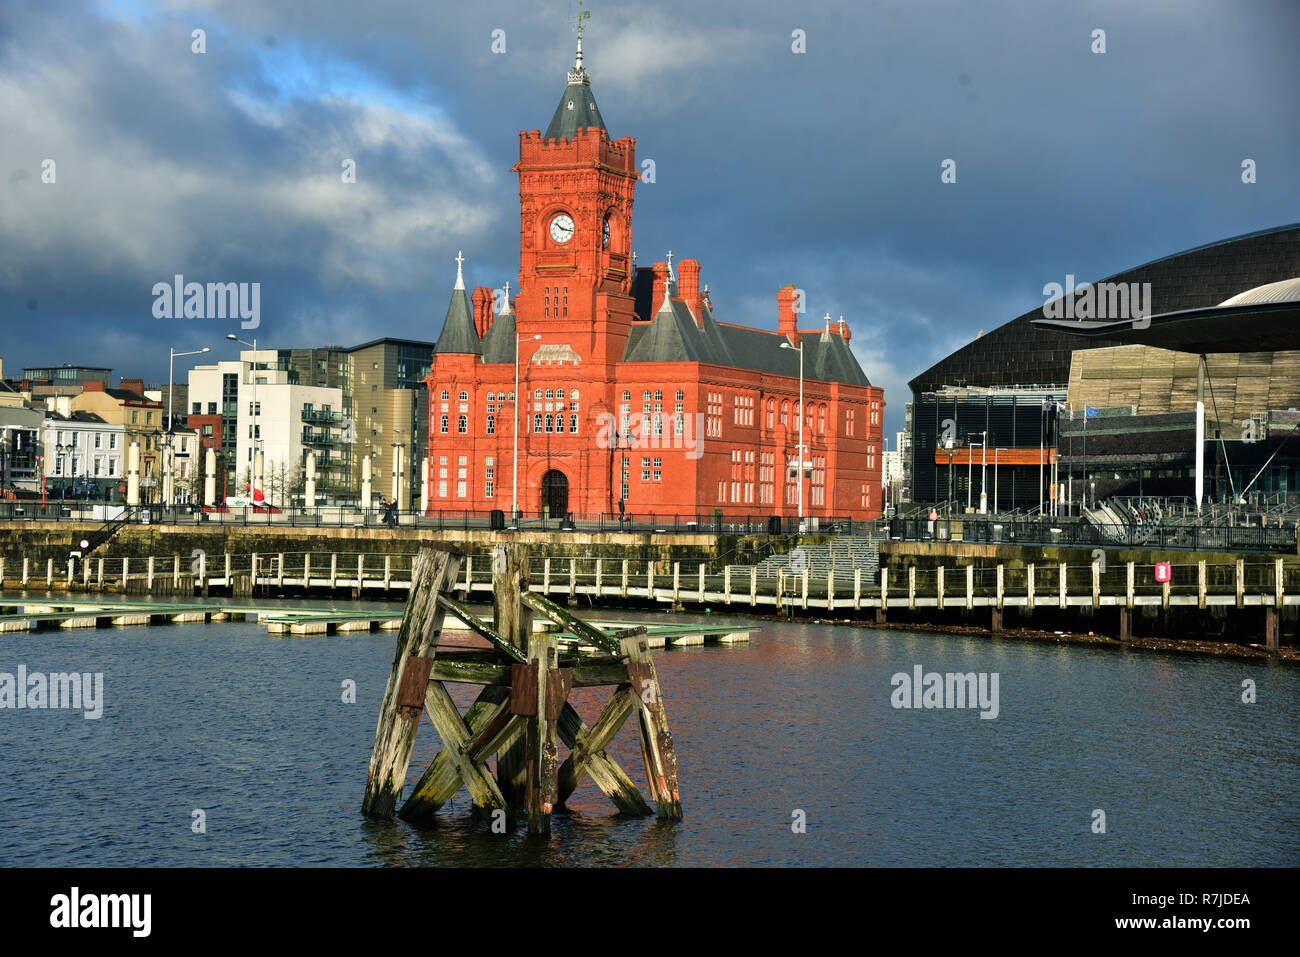 Pictures show Cardiff Bay, Mermaid Quay, St David's Hotel and Spa and the Pierhead  building. Also pictured is part of the Senedd, and WMC Stock Photo